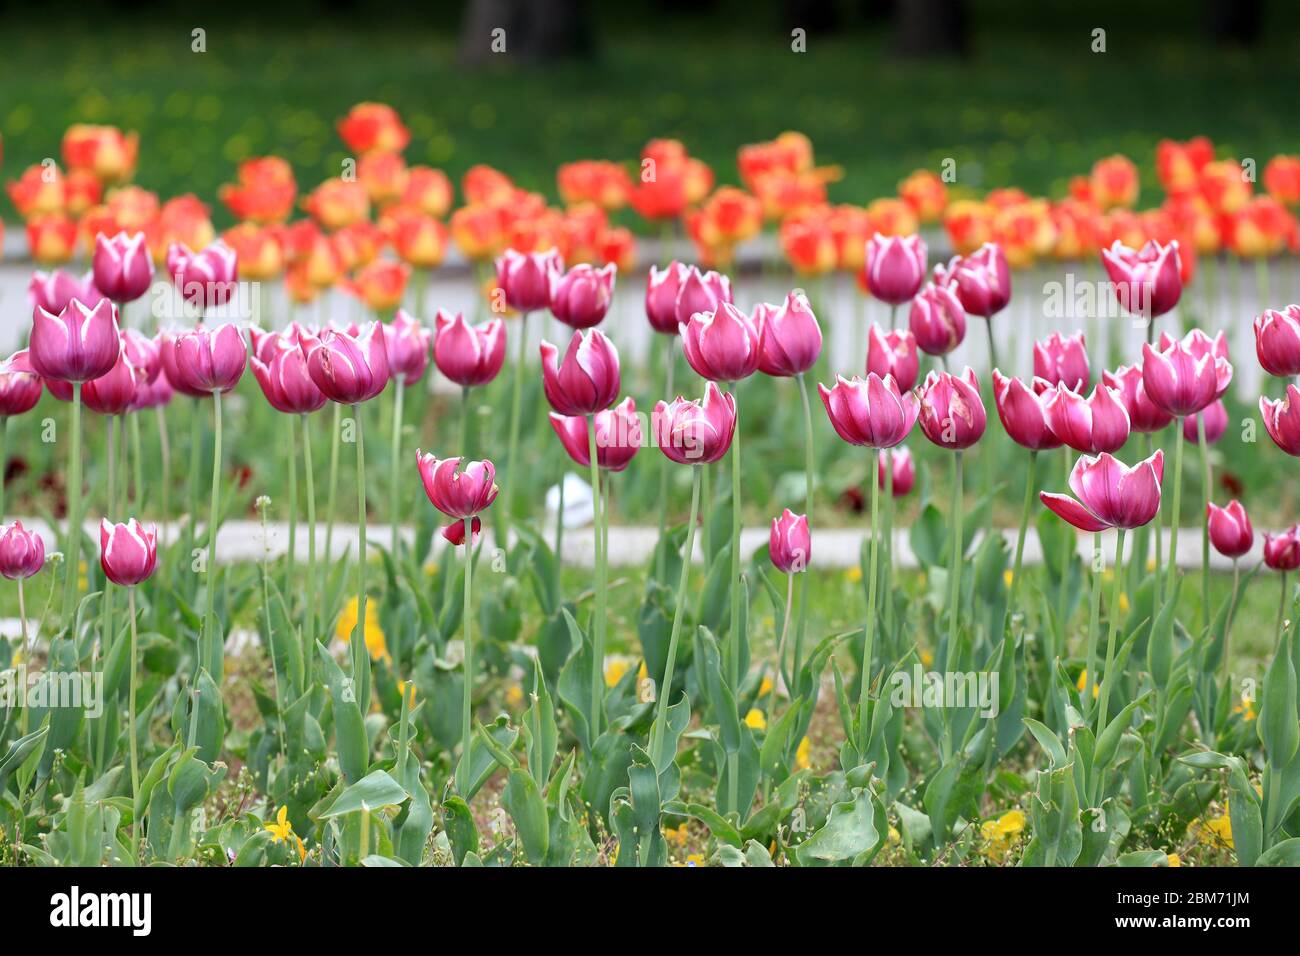 Field with colorful tulips in a park. Floral background and tulips pattern. Stock Photo